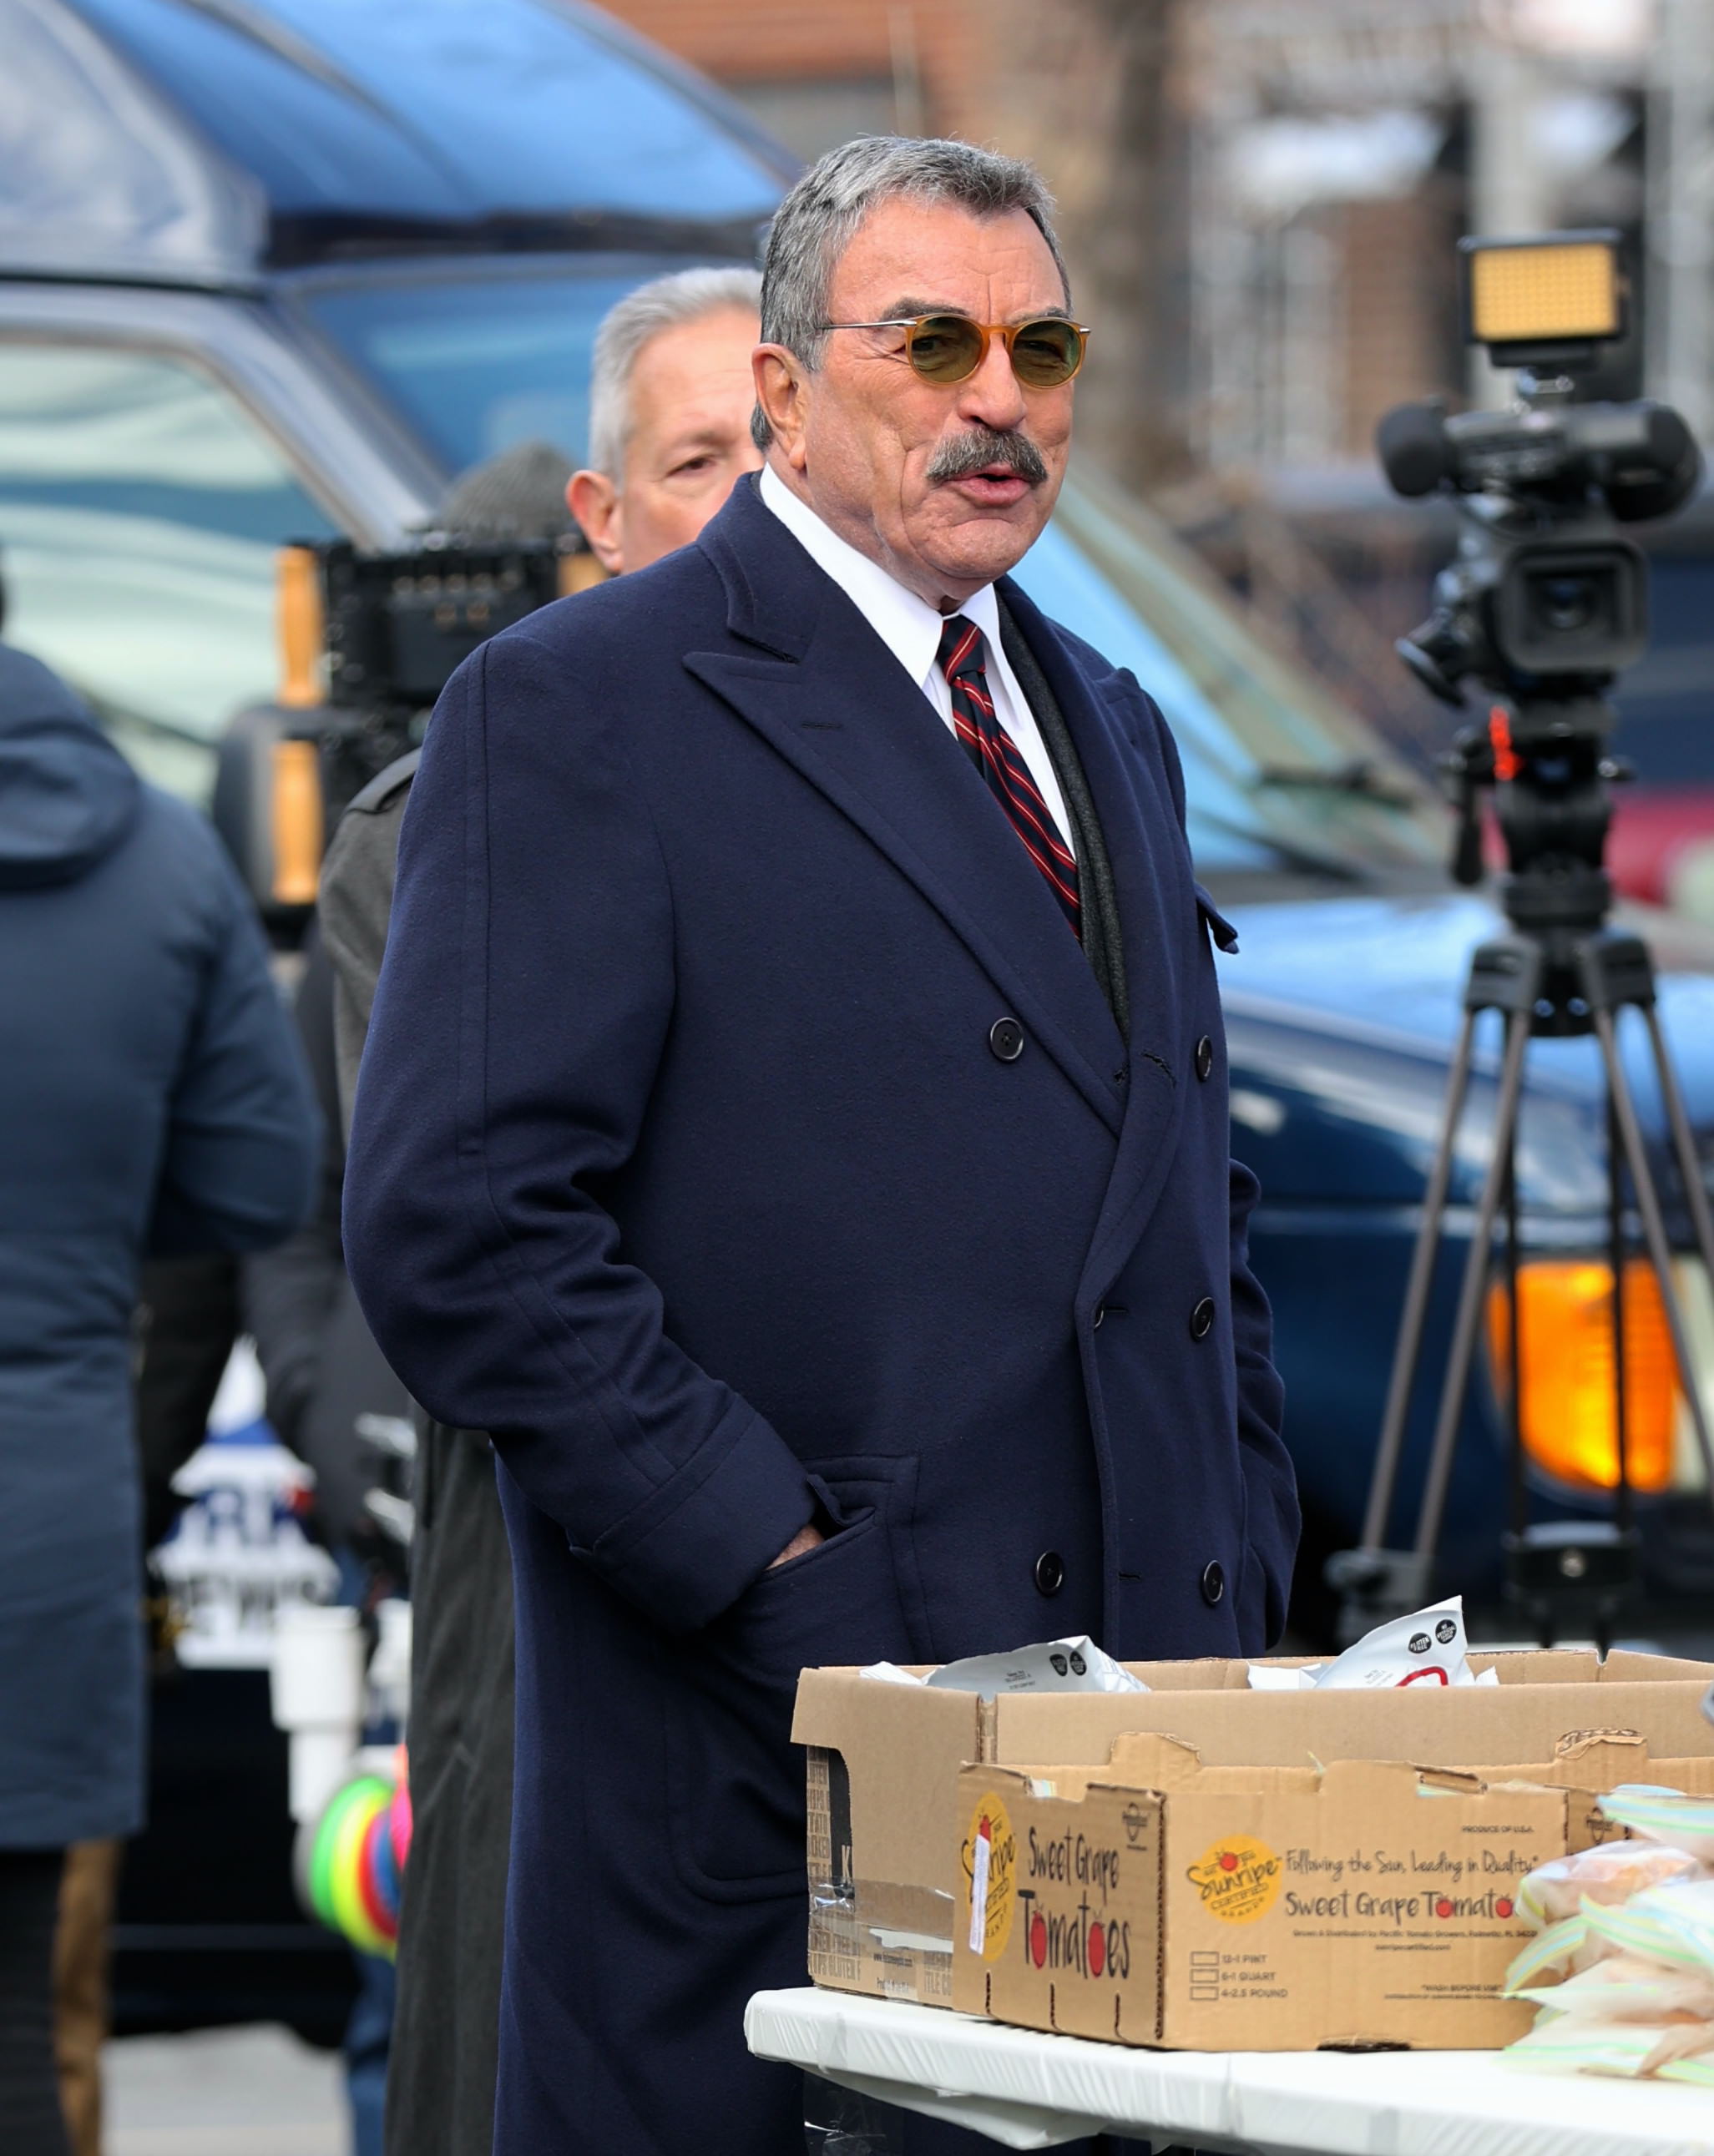 Tom Selleck is seen on the set of "Blue Bloods" on February 24, 2023, in New York City. | Source: Getty Images